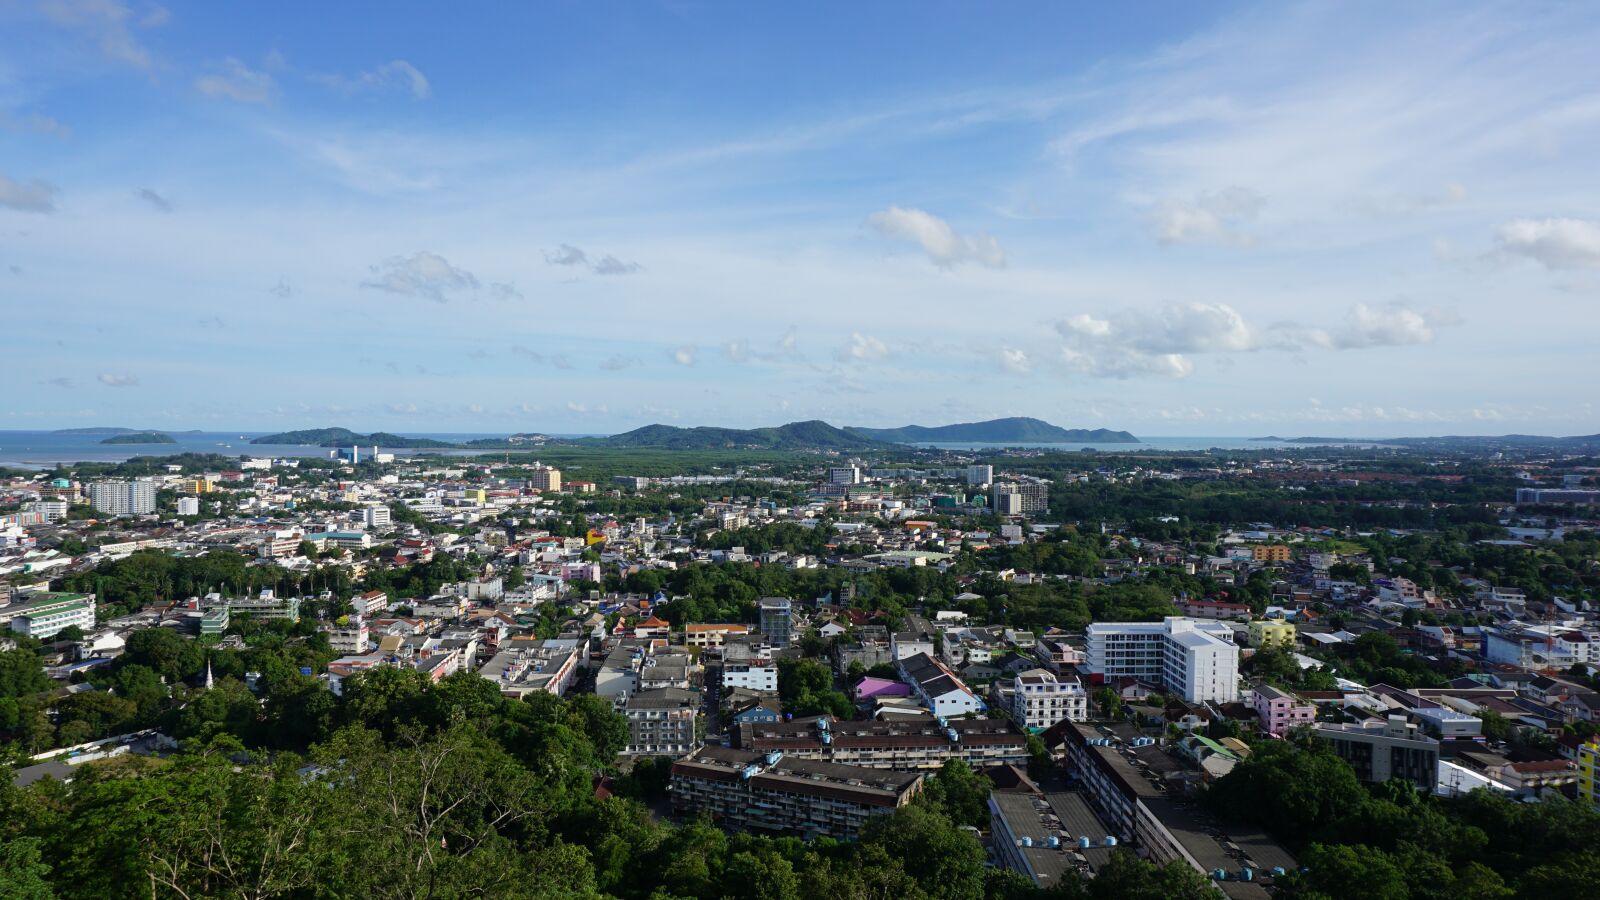 Sony a6000 sample photo. Phuket town, overlooking the photography